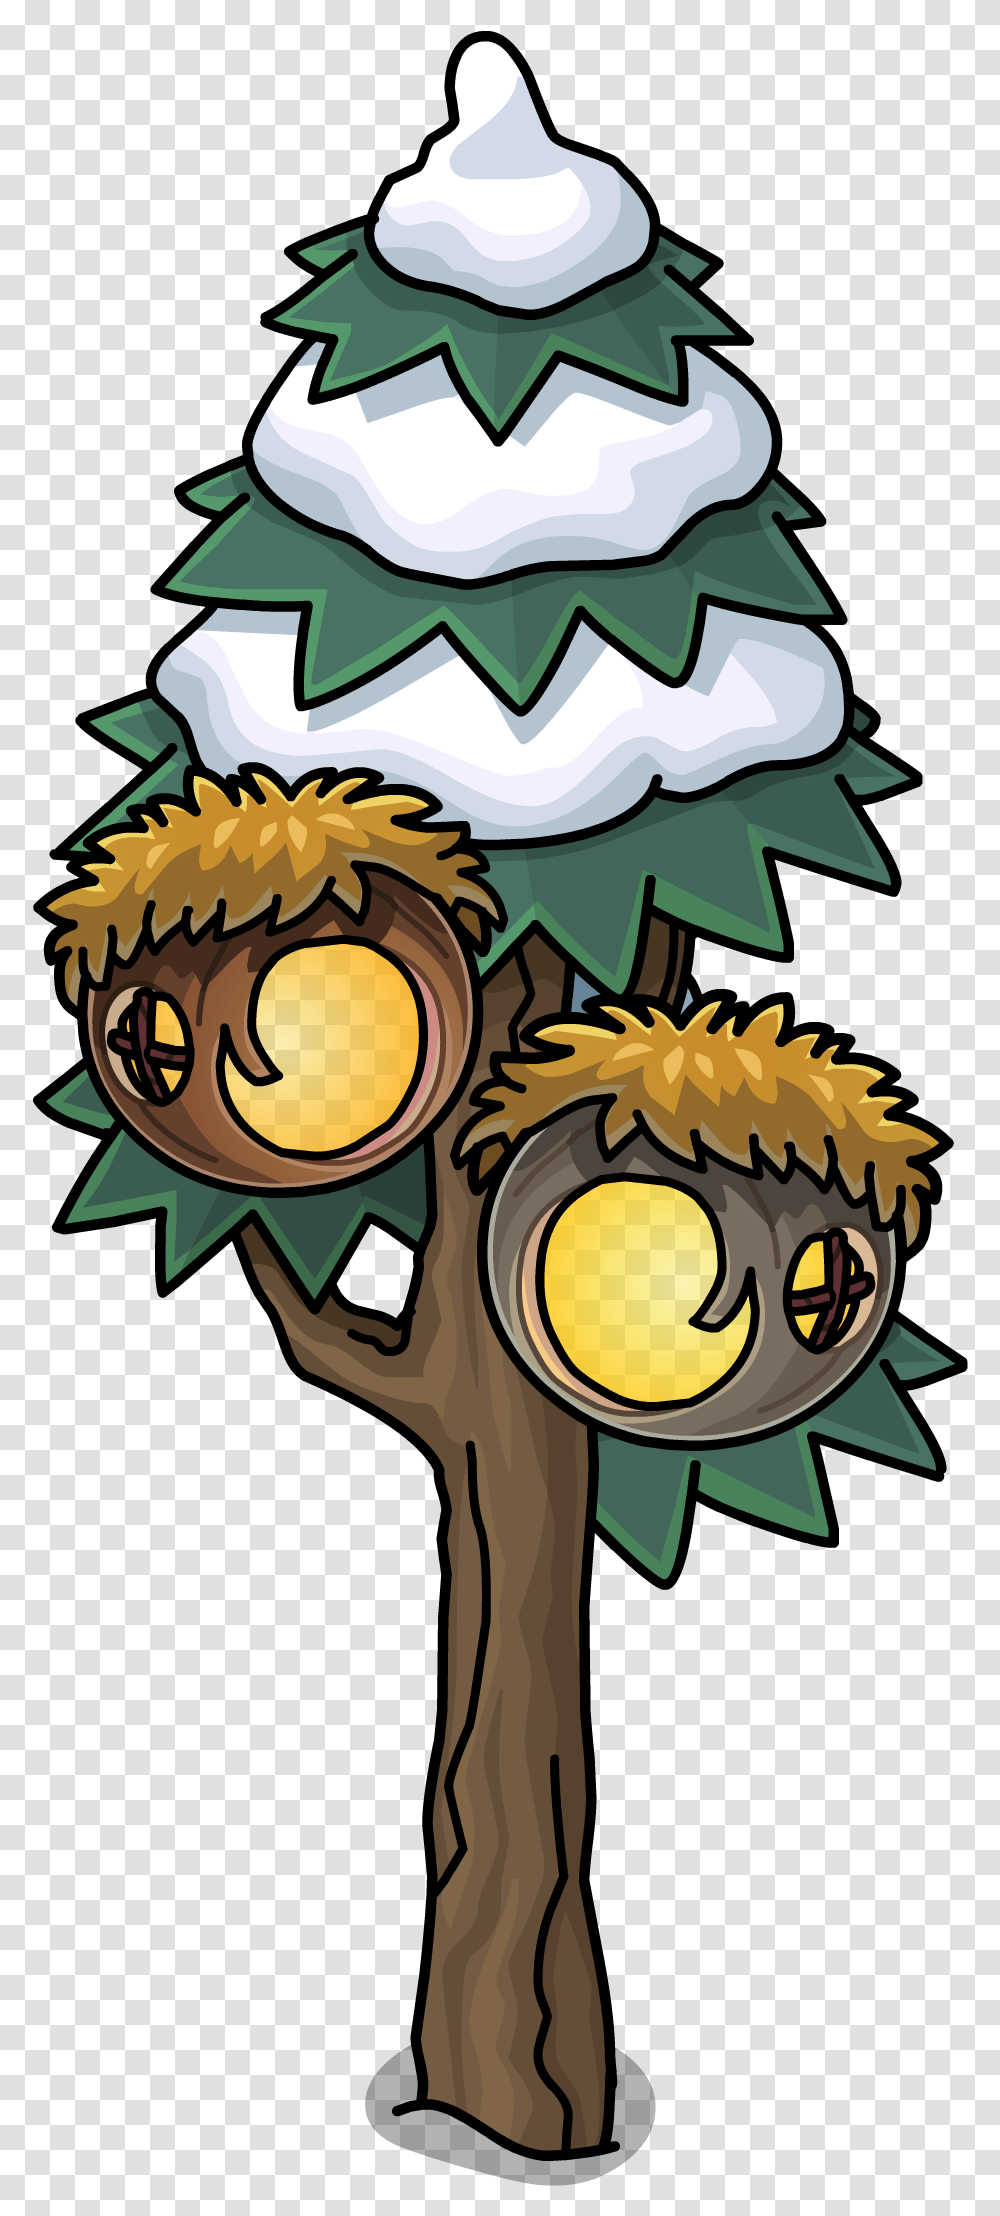 Download Hd Wilds Puffle Treehouse In Game Cartoon Club Penguin Tree, Angry Birds, Plant, Vegetation, Graphics Transparent Png